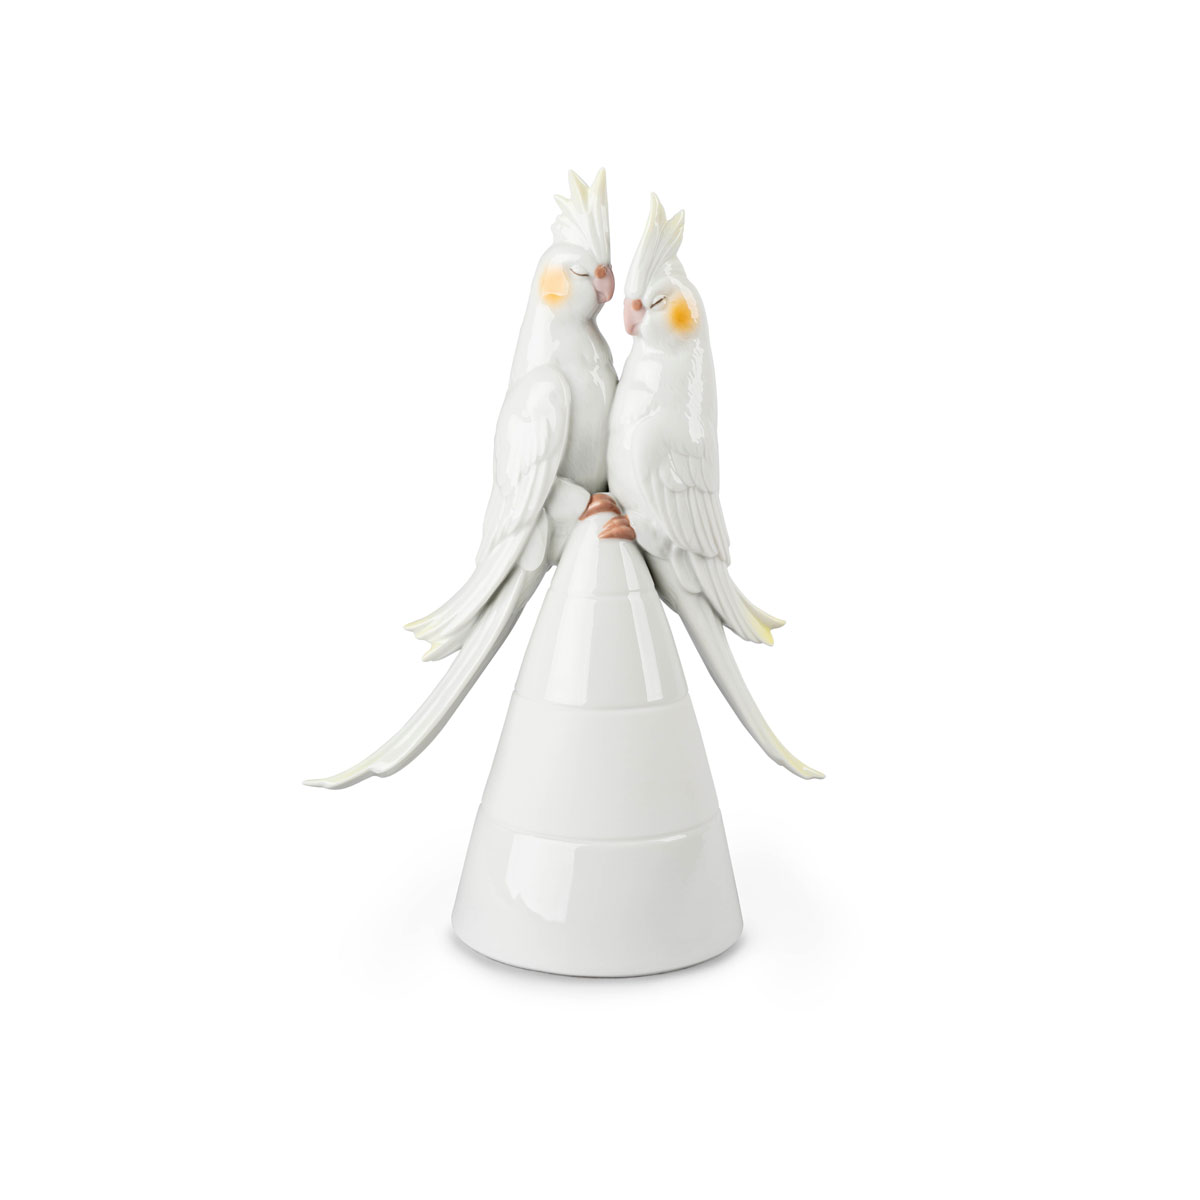 Lladro Classic Sculpture, Nymphs In Love Figurine